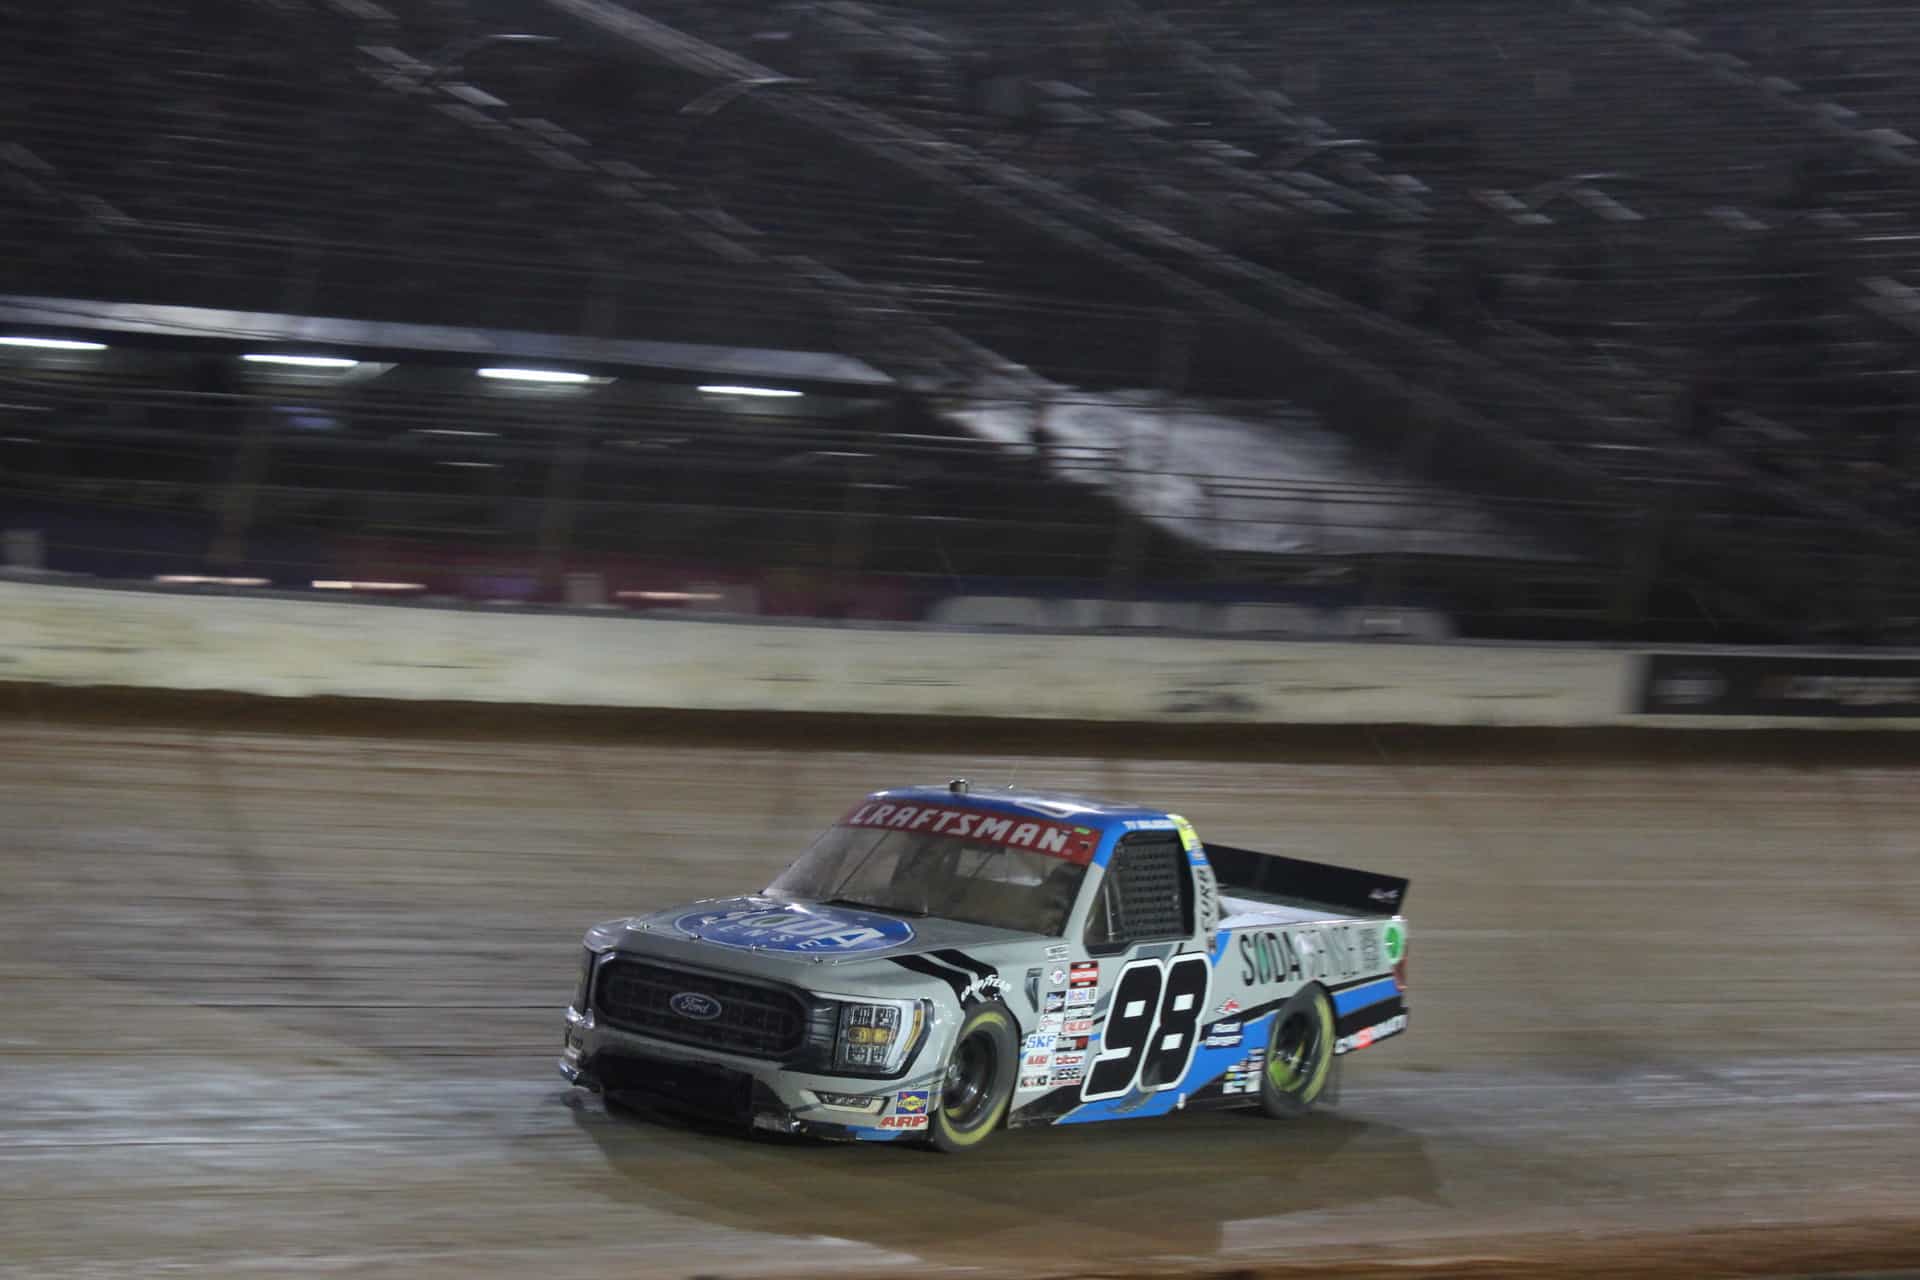 Ty Majeski had fun while battling with his ThorSport Racing teammate in the NASCAR Craftsman Truck Series race at Bristol Motor Speedway Dirt Track.